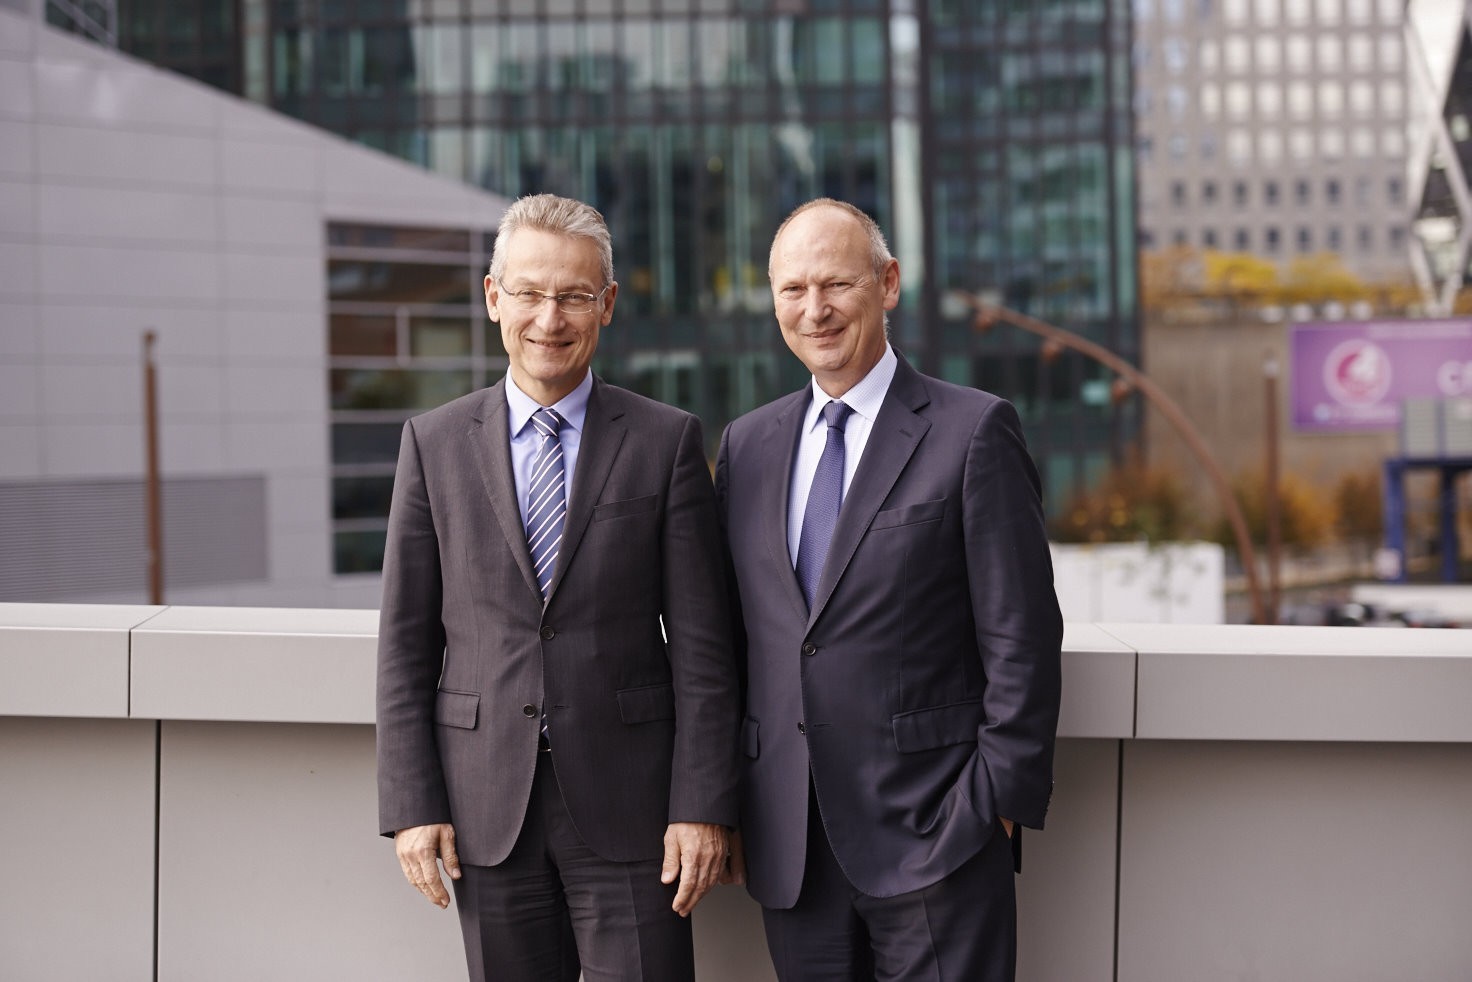 Dr. Axel Theis, Board Member of Allianz SE, and Wilfried Verstraete, CEO of Euler Hermes